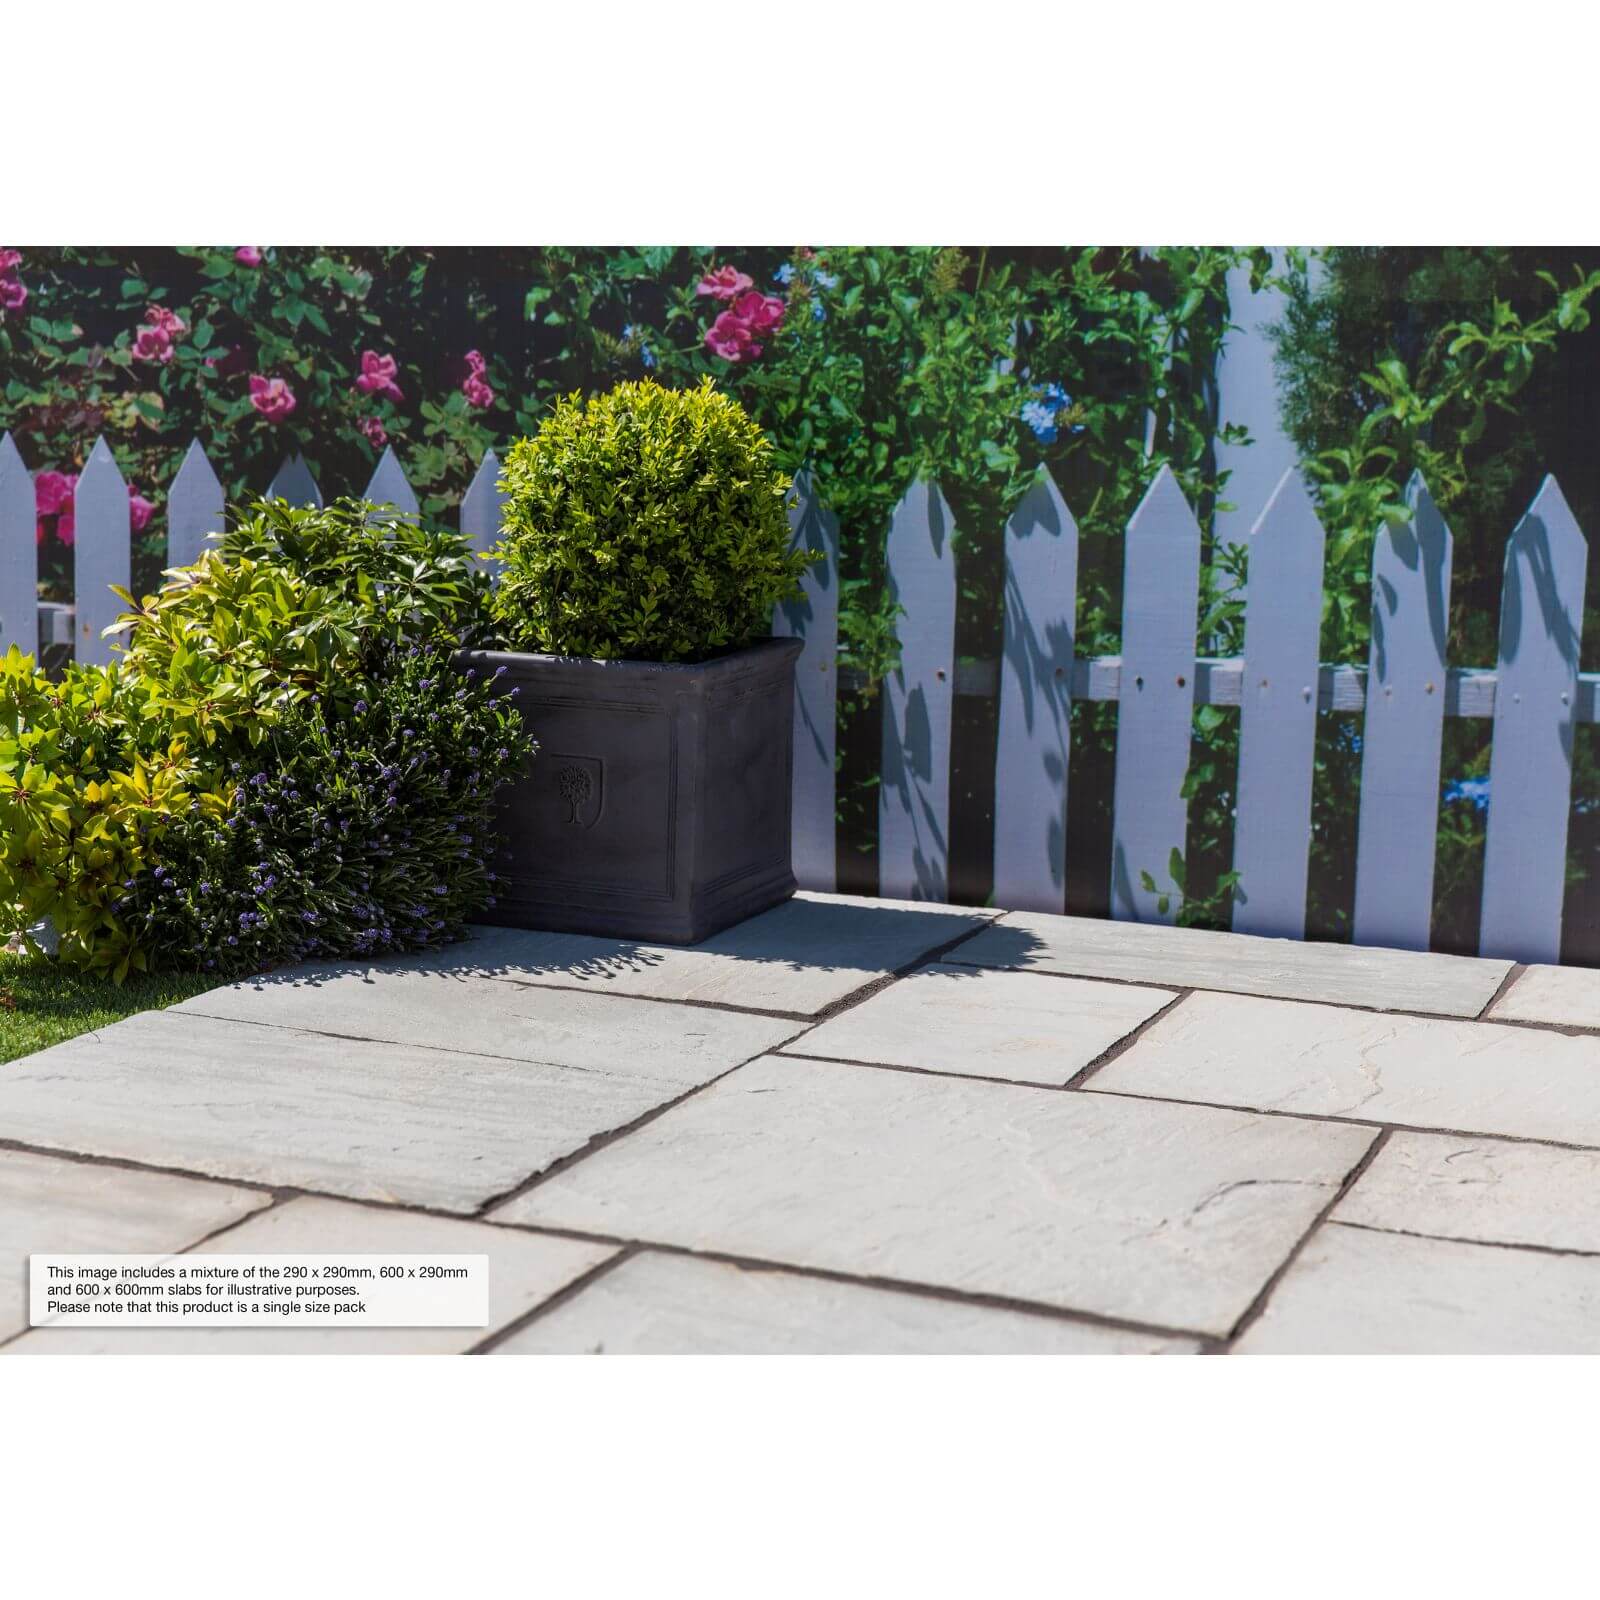 Stylish Stone Natural Sandstone 600 x 290mm Lakefell Full Pack of 84 Slabs